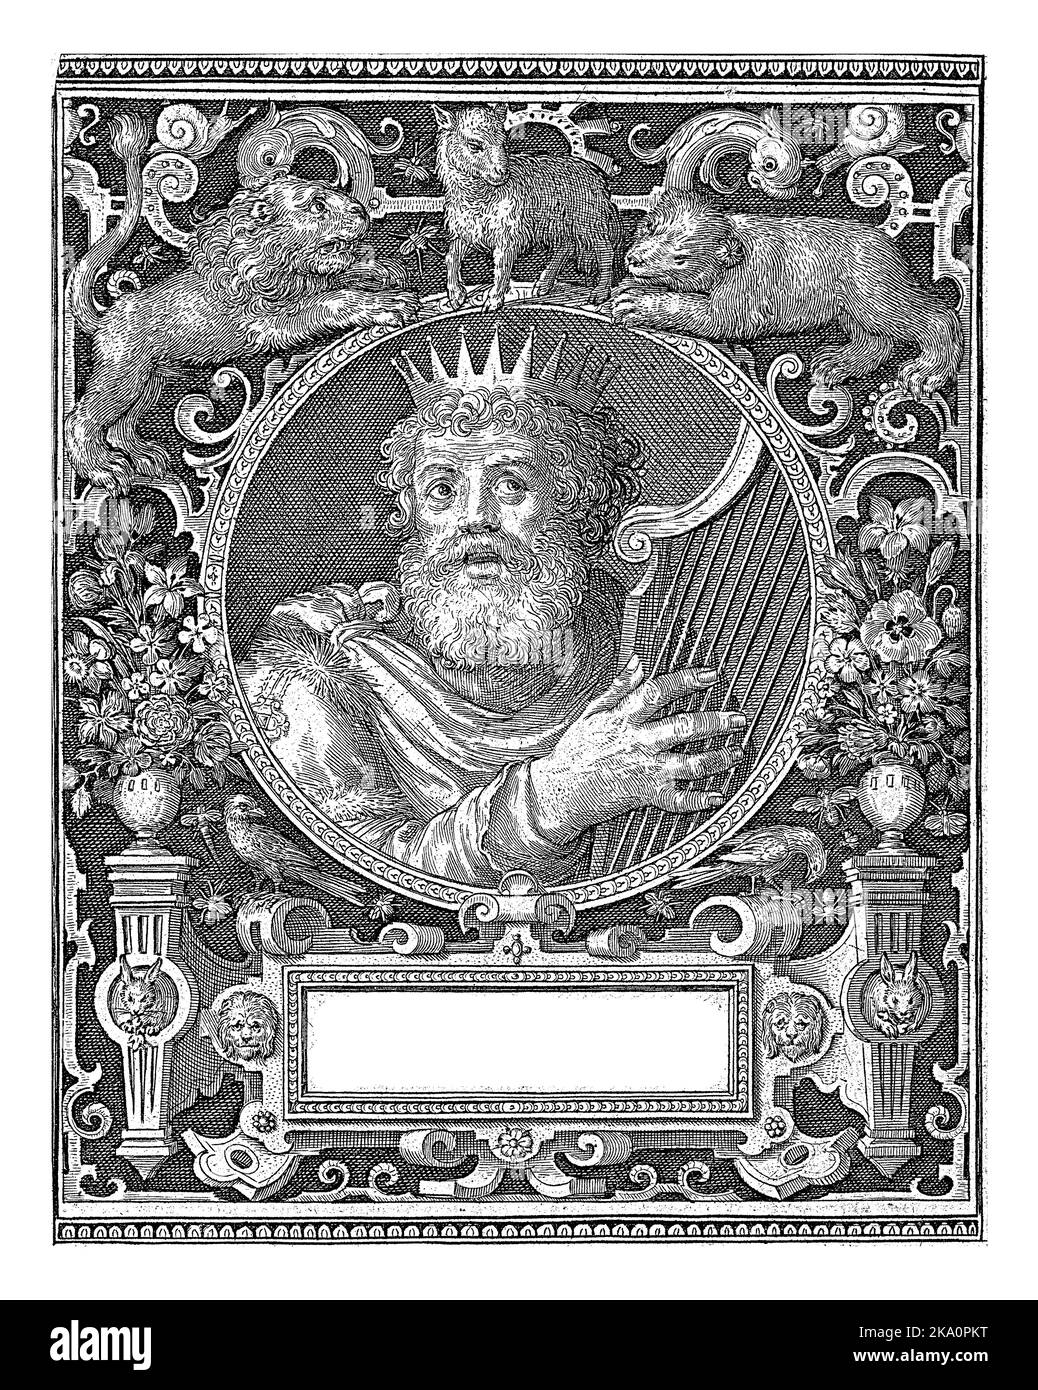 Portrait with bust of King David with harp in medallion within rectangular frame with ornaments in the shape of wild animals, a lion and bear, and a l Stock Photo